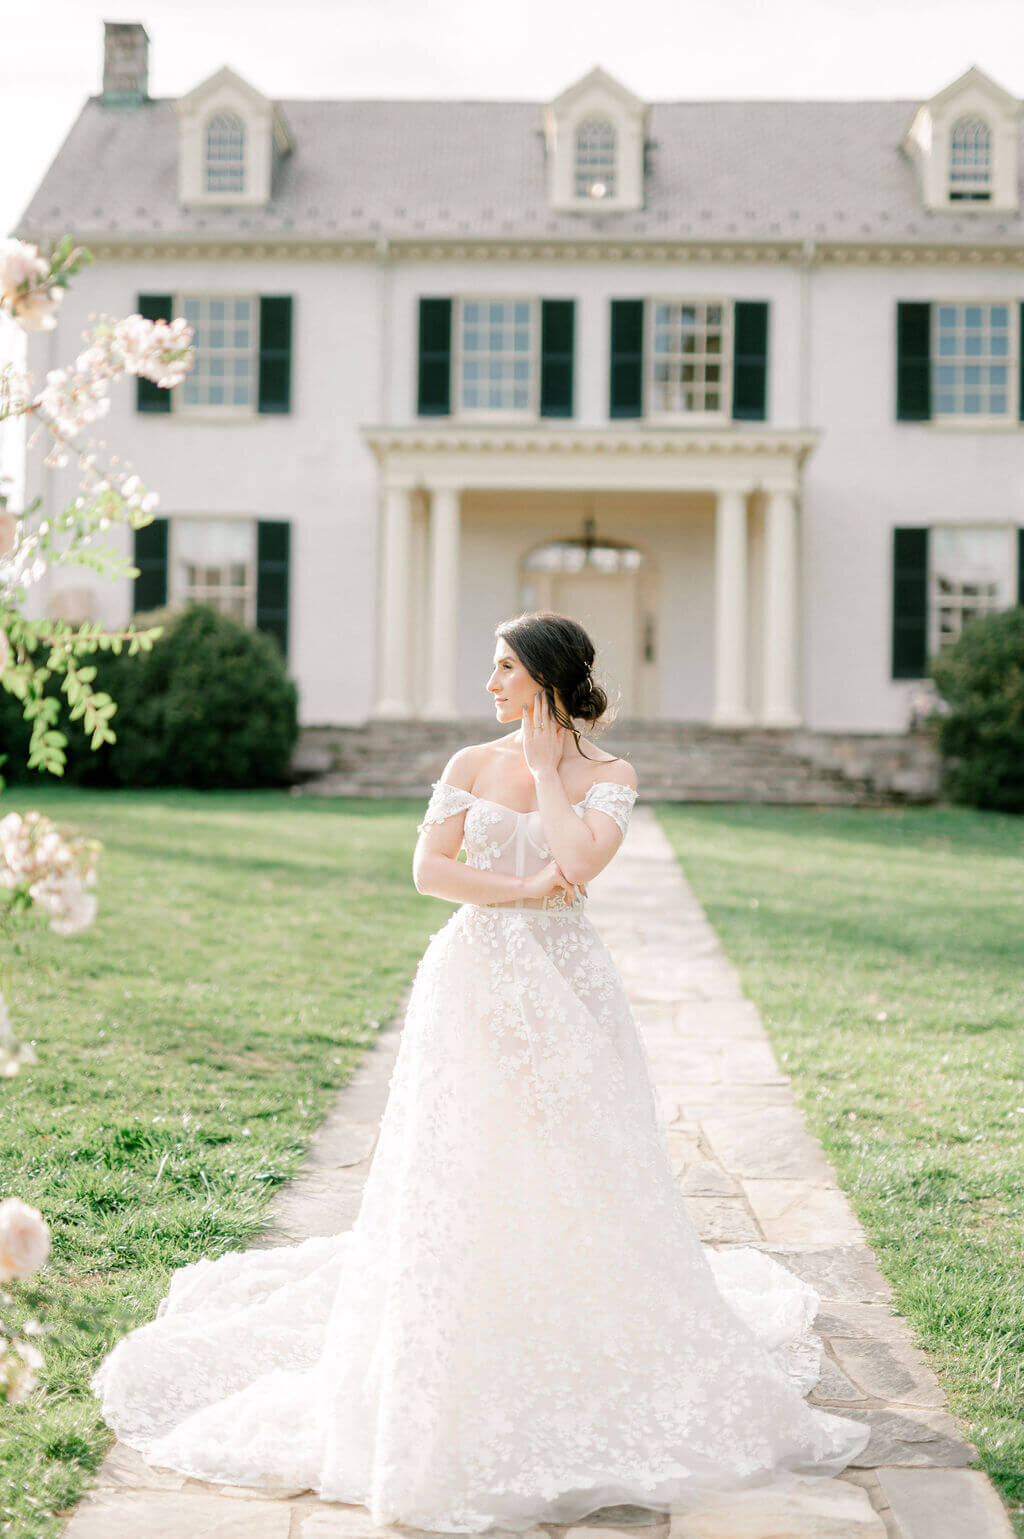 Bridal wedding photos of bride in front of Rust Manor House